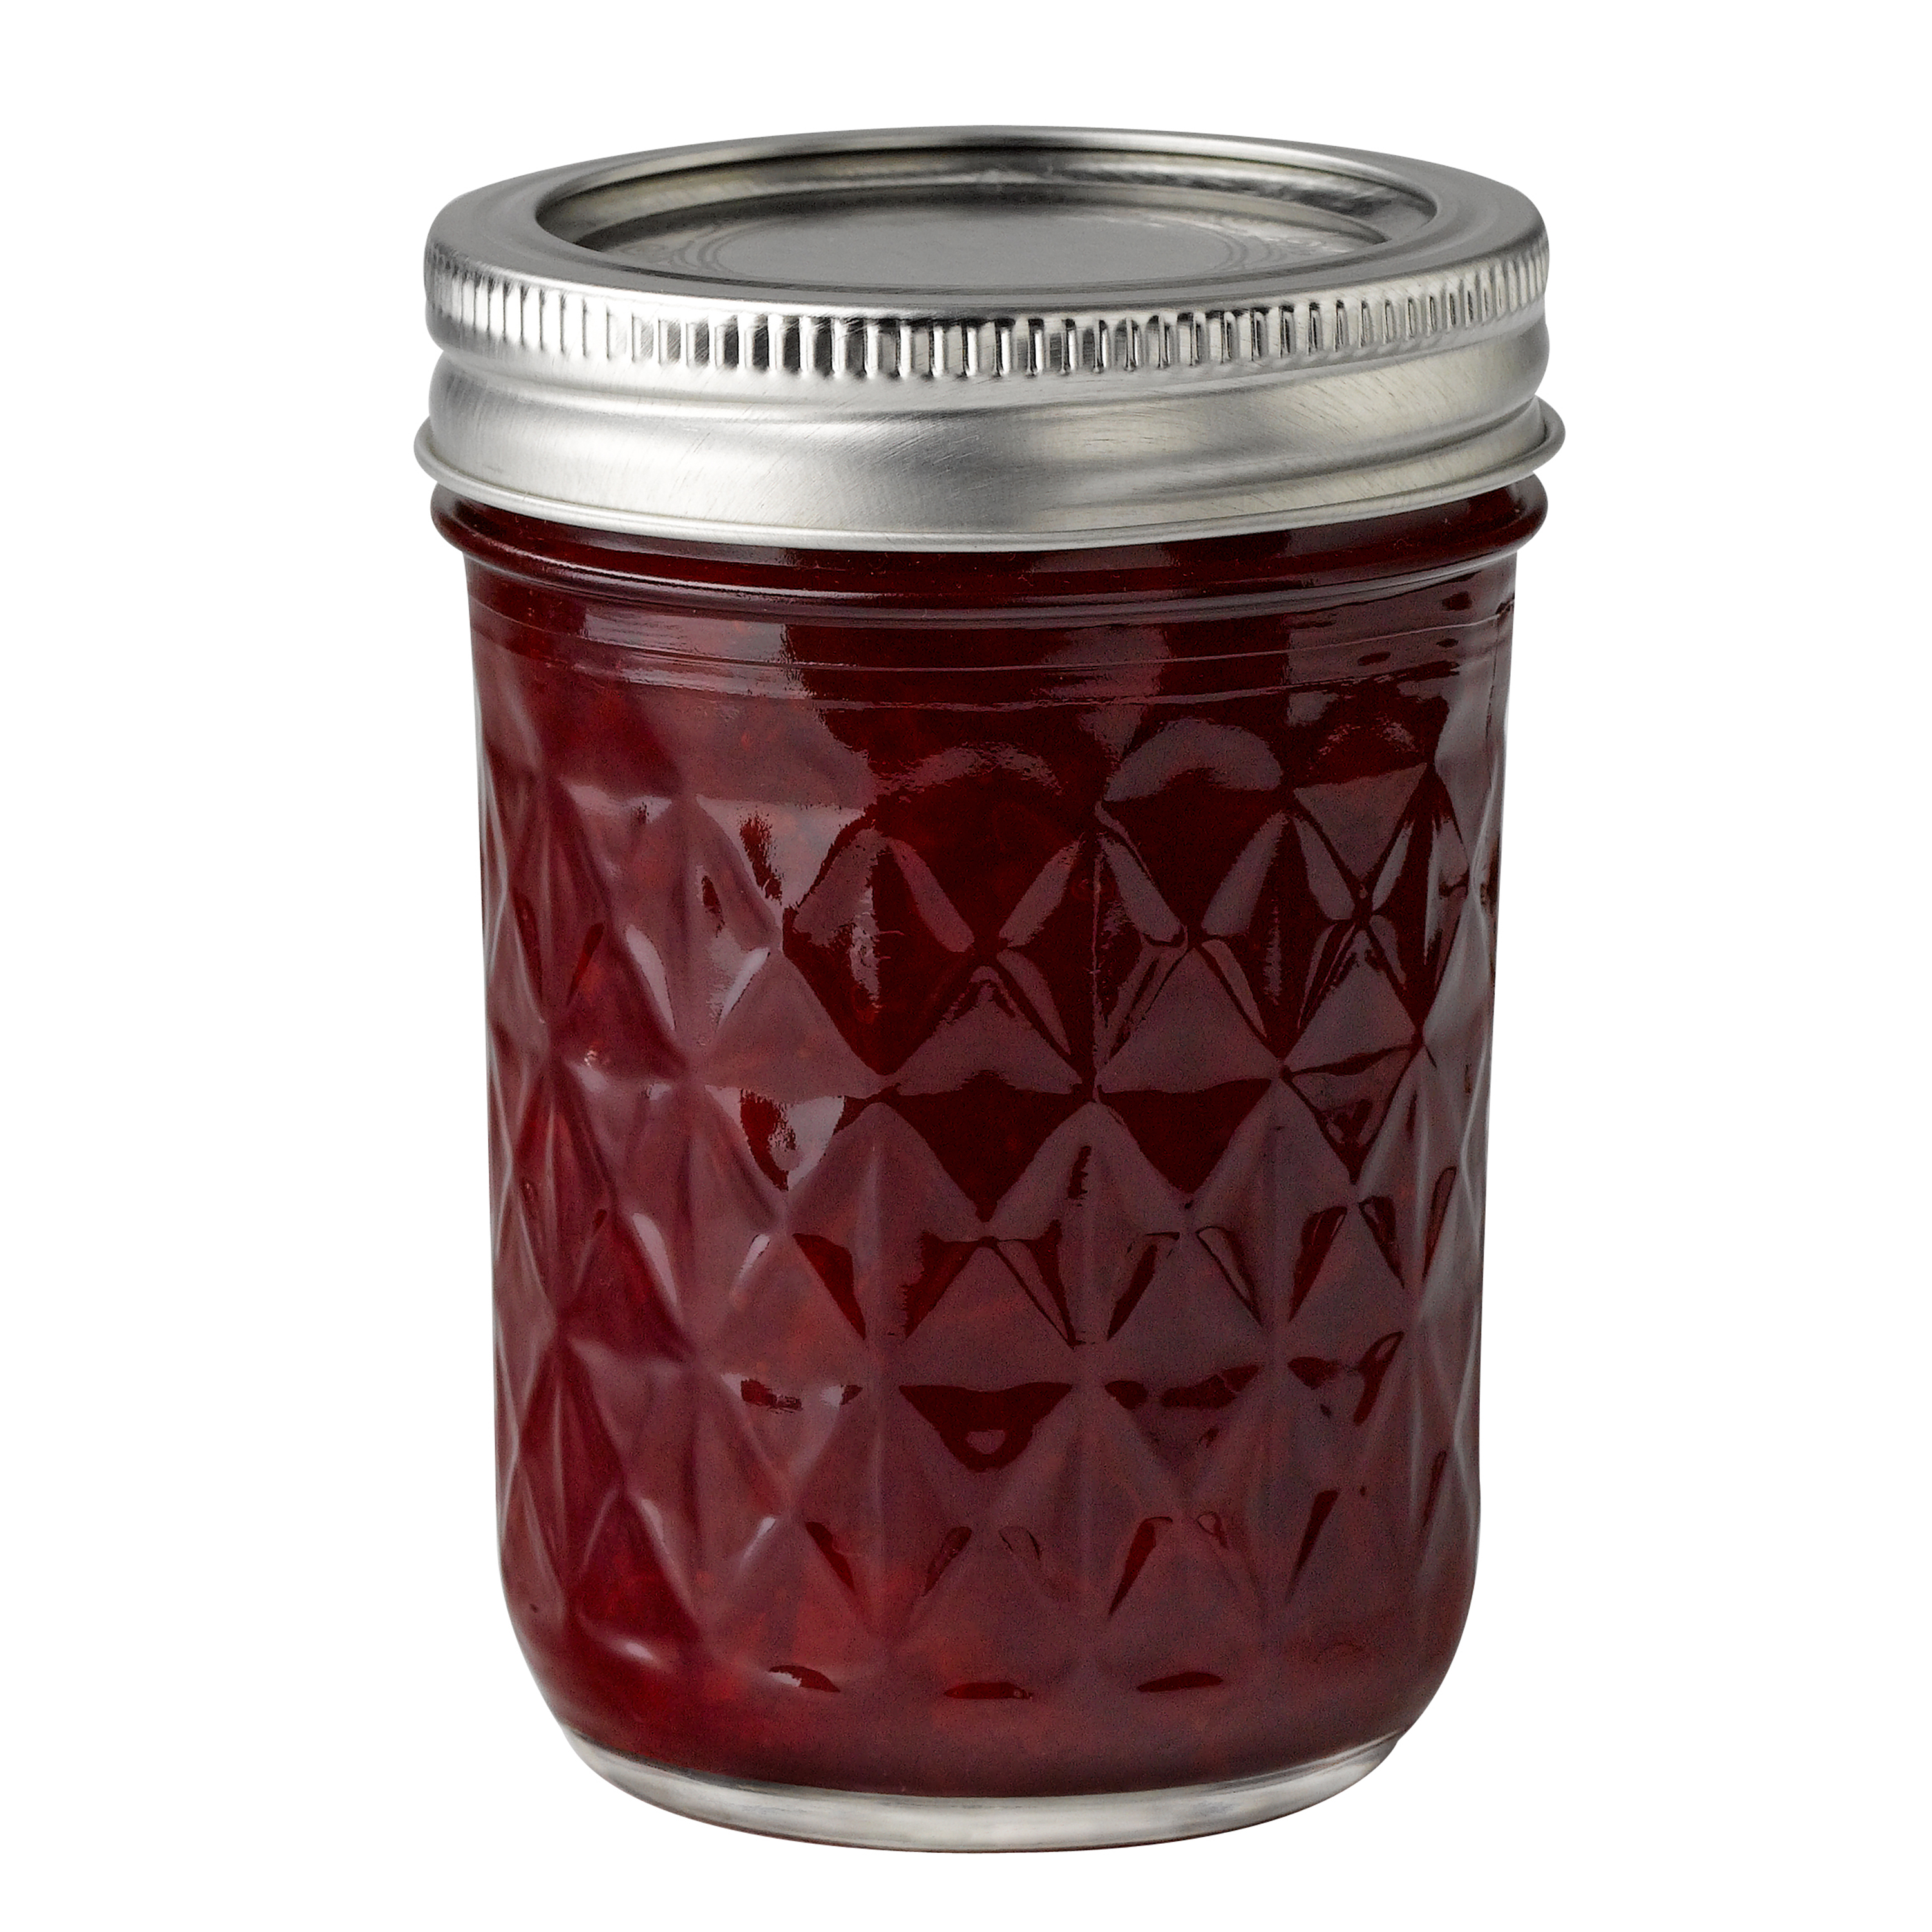 Ball Quilted Crystal Mason Jar w/ Lid & Band, Regular Mouth, 8 Ounces, 12 Count, 4 Lb. - image 2 of 8